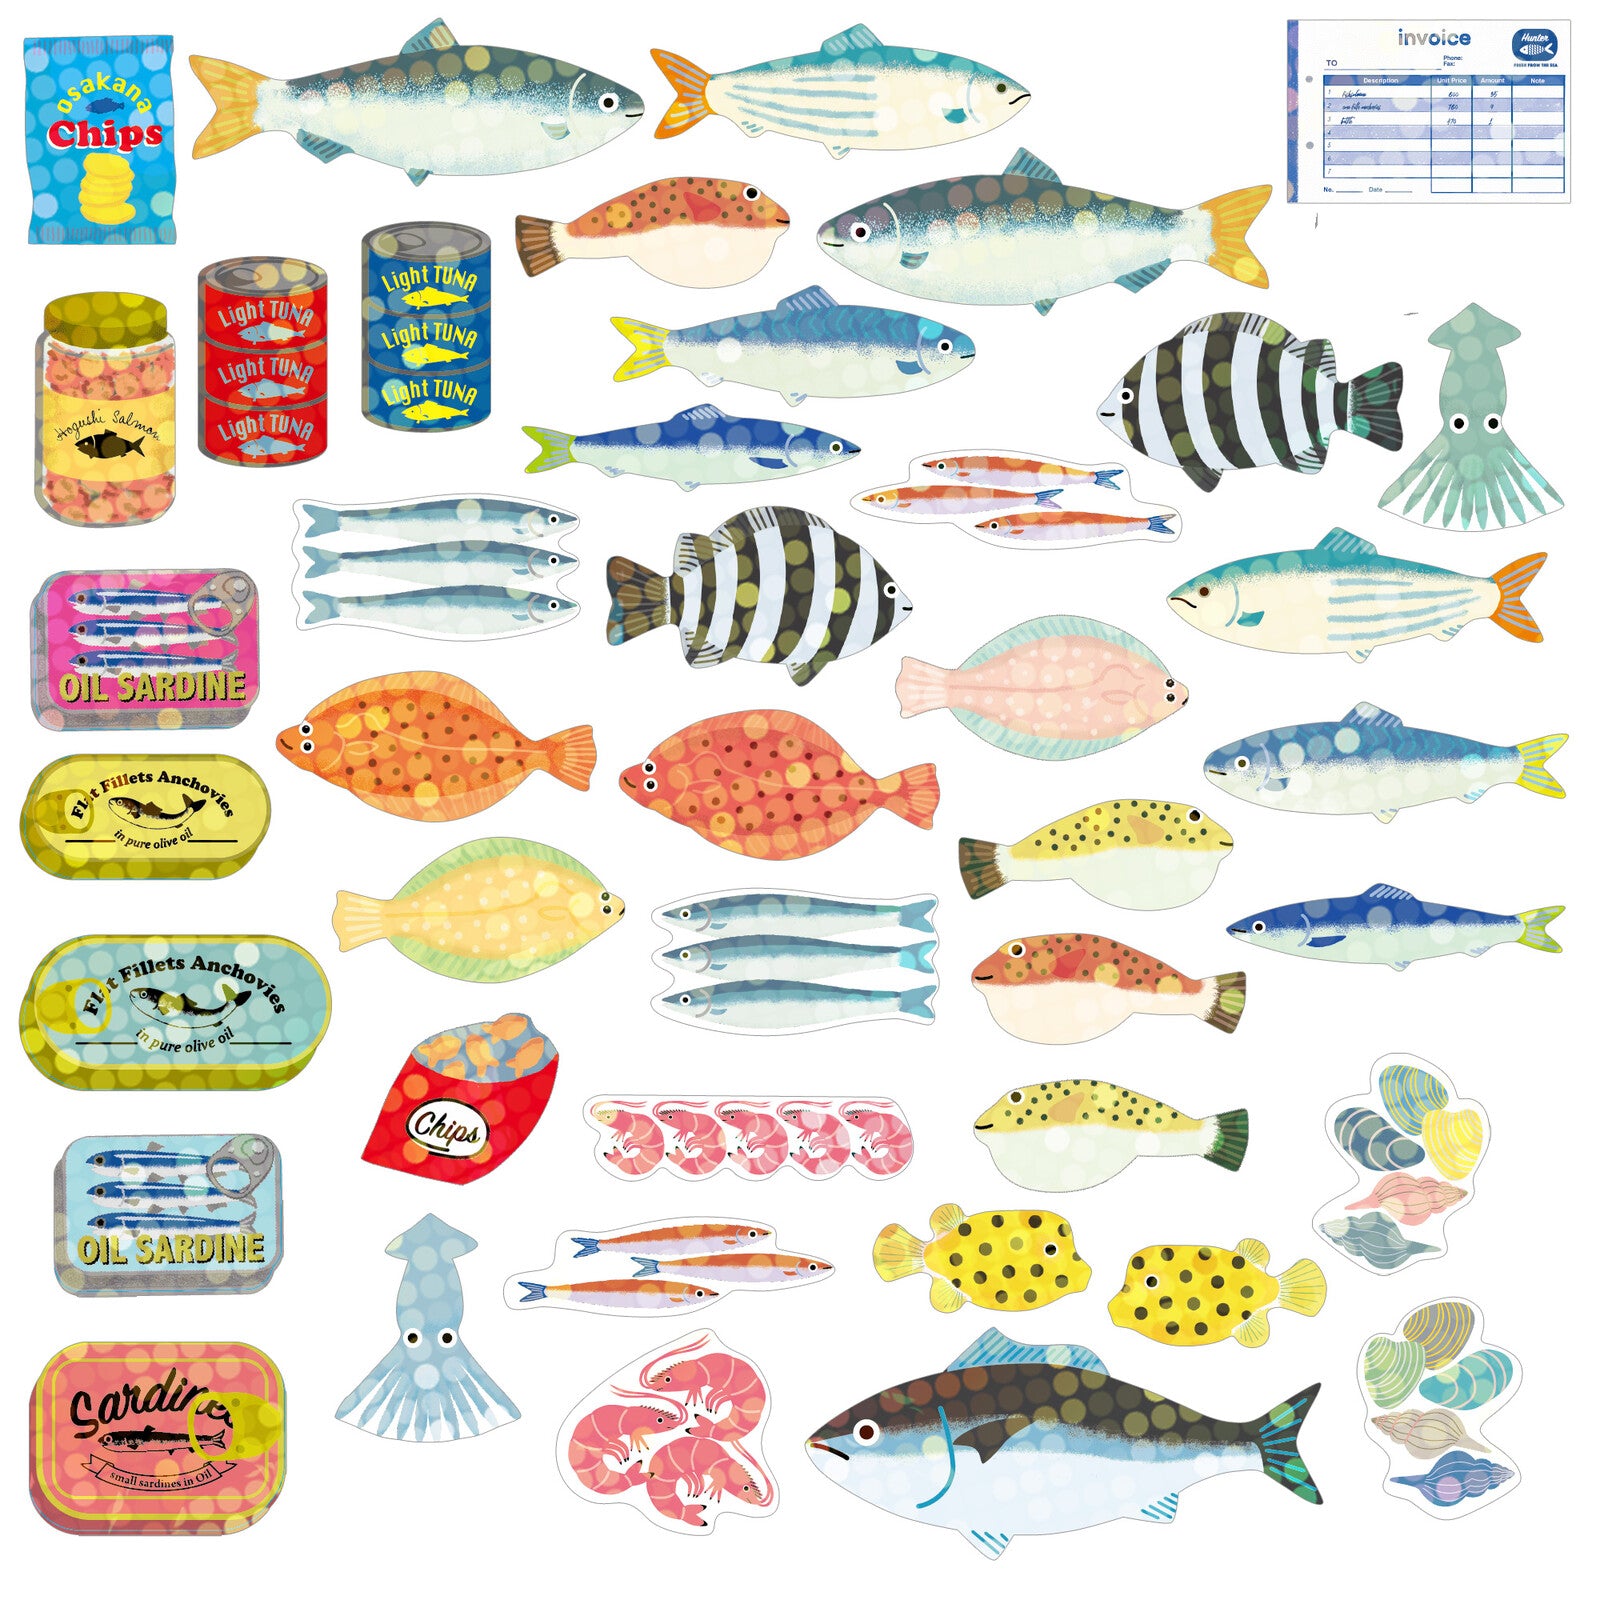 2023 HFG Sticker Pack - 17 UV Protected Hawaii Fishing Stickers (Ships FREE)